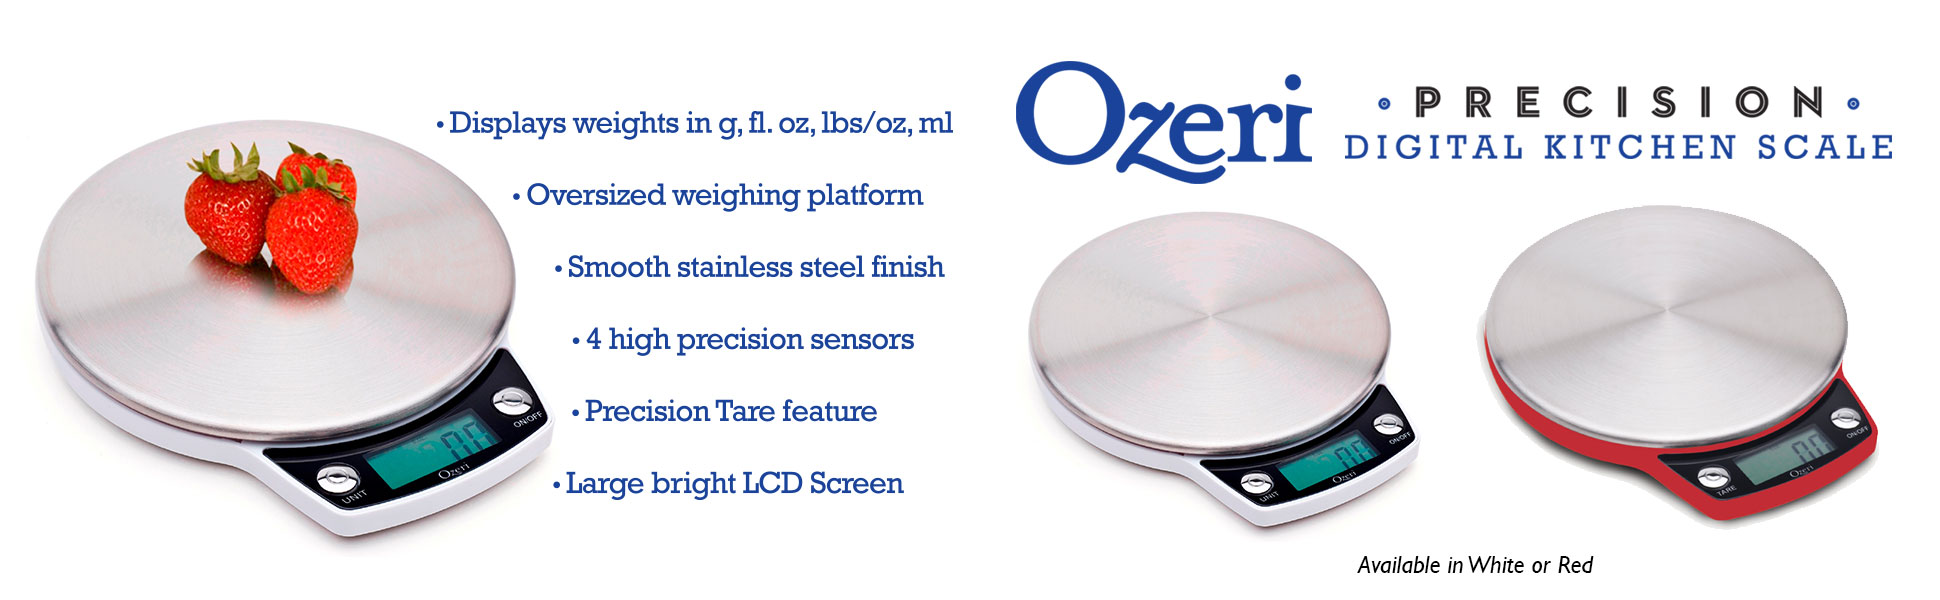 Ozeri Professional Series Ceramic Earth Pan, Hand Cast and Made in Germany